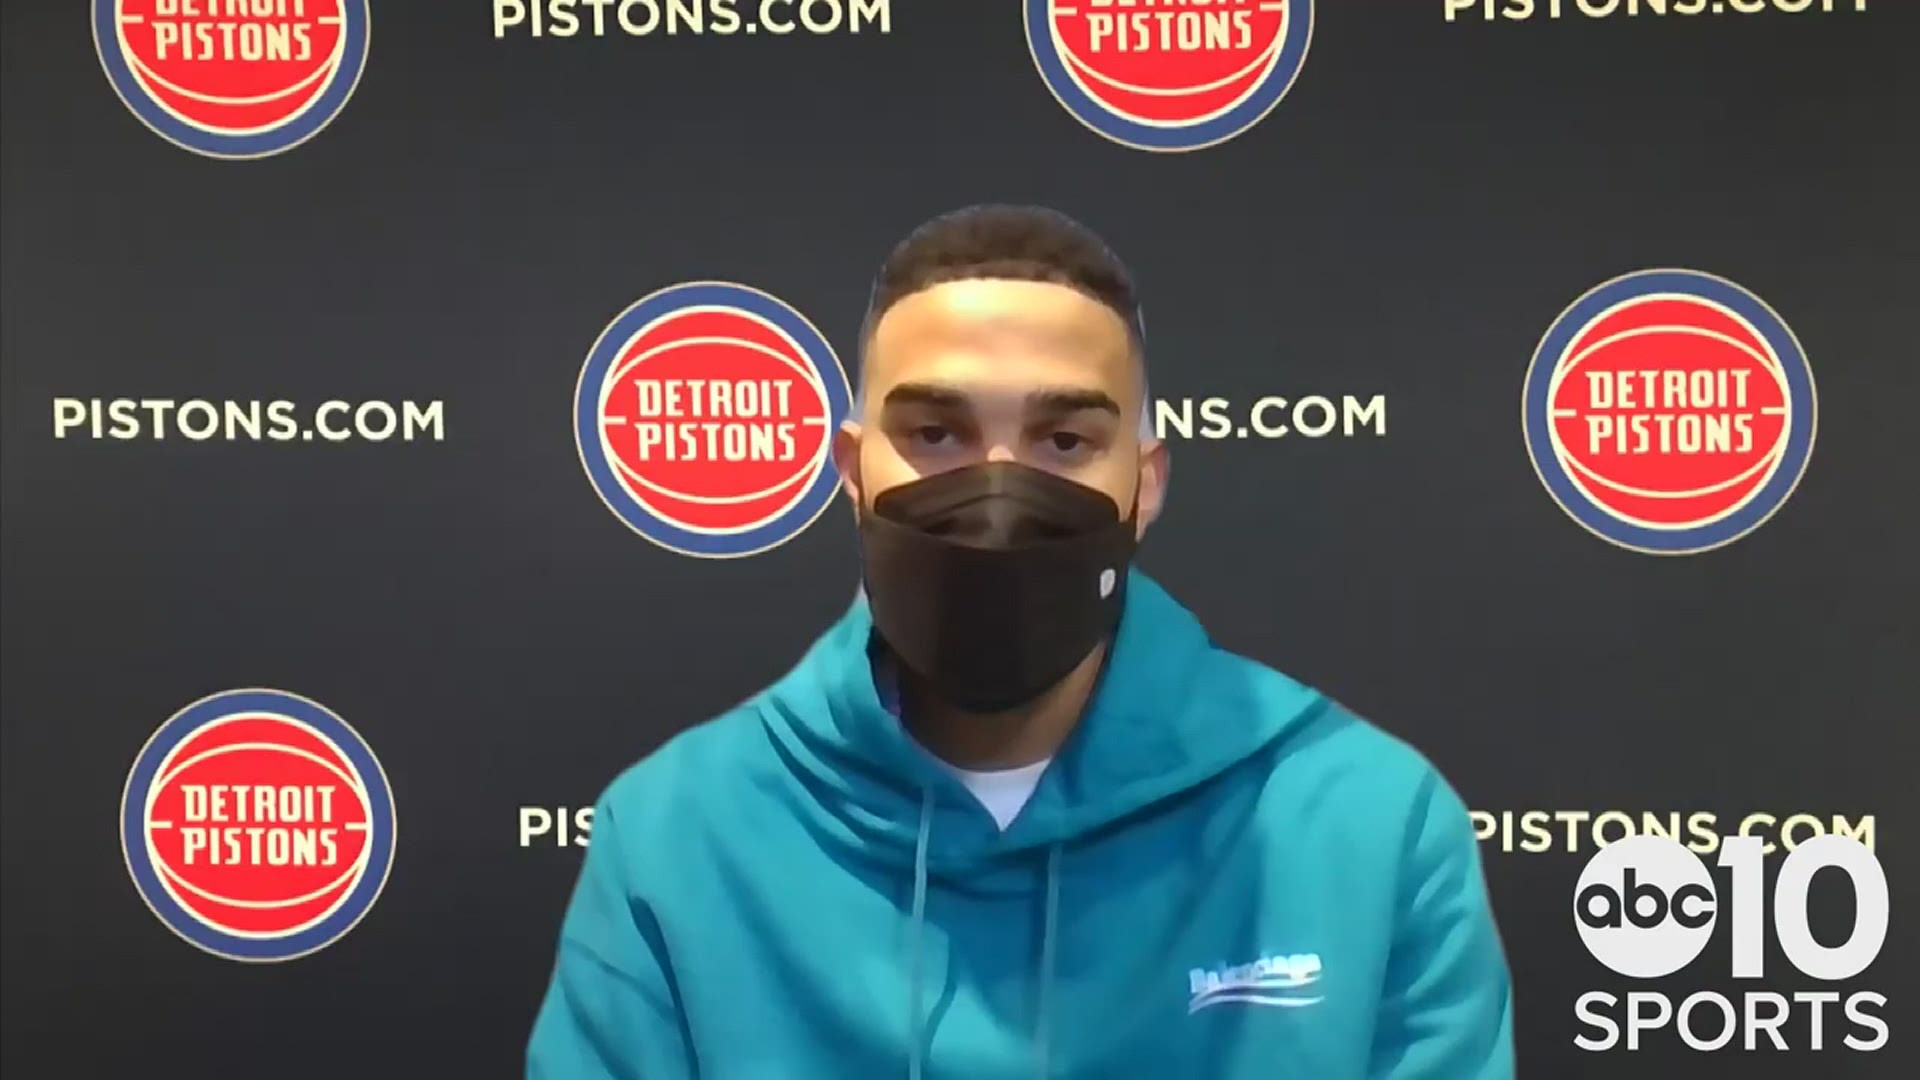 After playing against the Kings for the first time since being traded to Detroit, Pistons' Cory Joseph talks about his season-high 24 points against his old team.